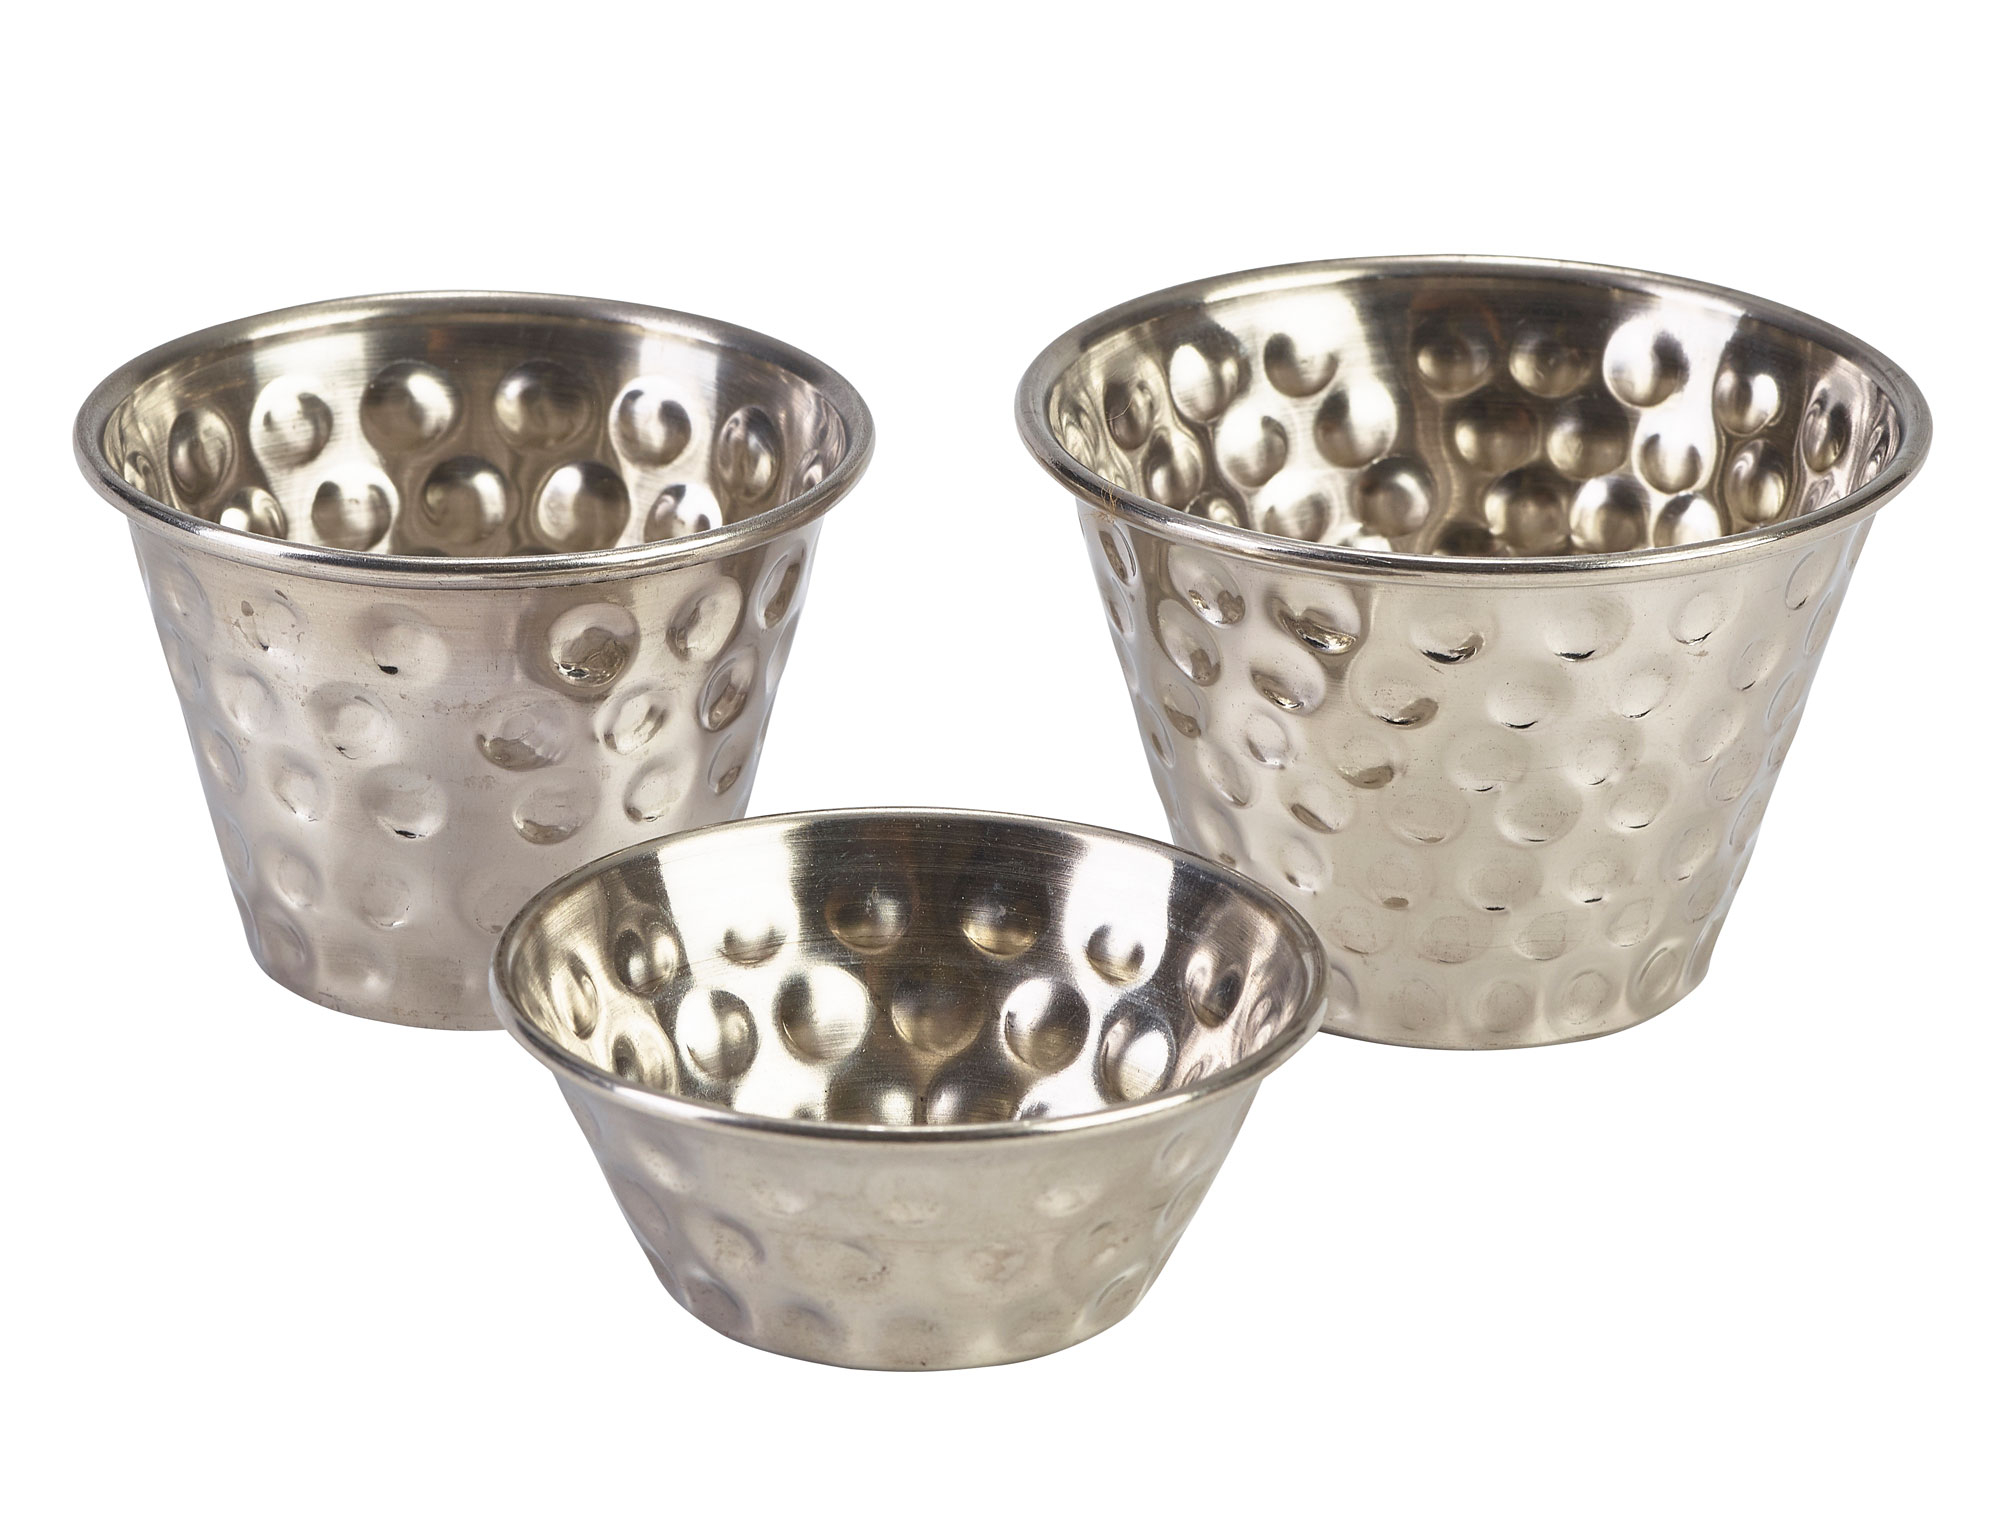 Ramekin with rolled edge, stainless steel hammered - various sizes